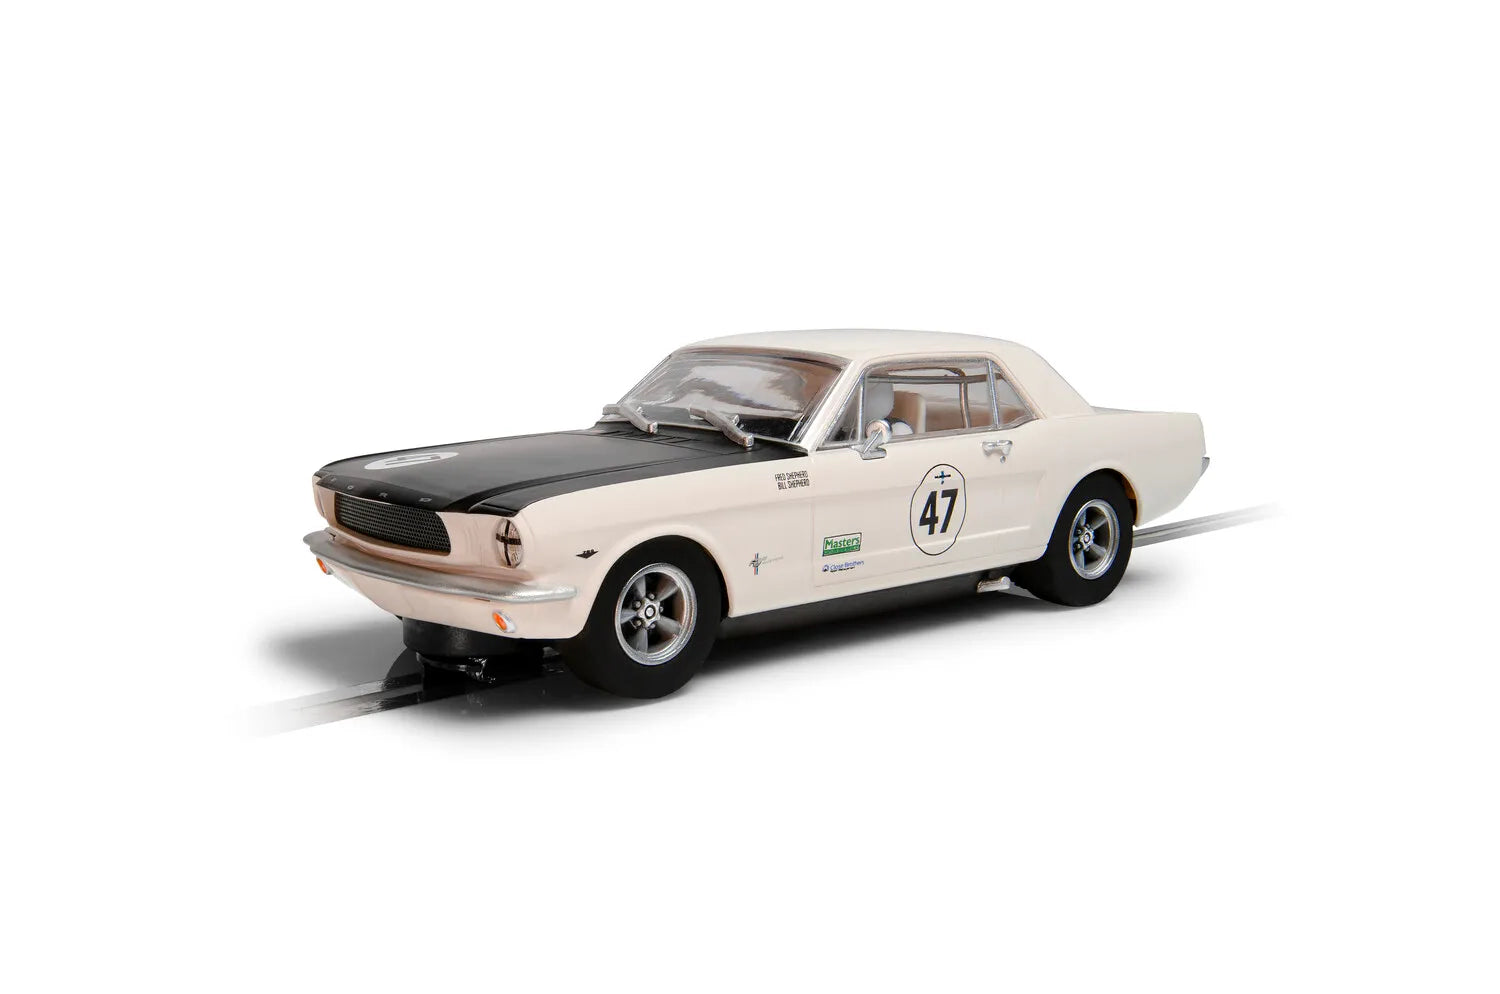 Ford Mustang - Bill and Fred Shepherd - Goodwood Revival Scalextric 1:32 - Chester Model Centre